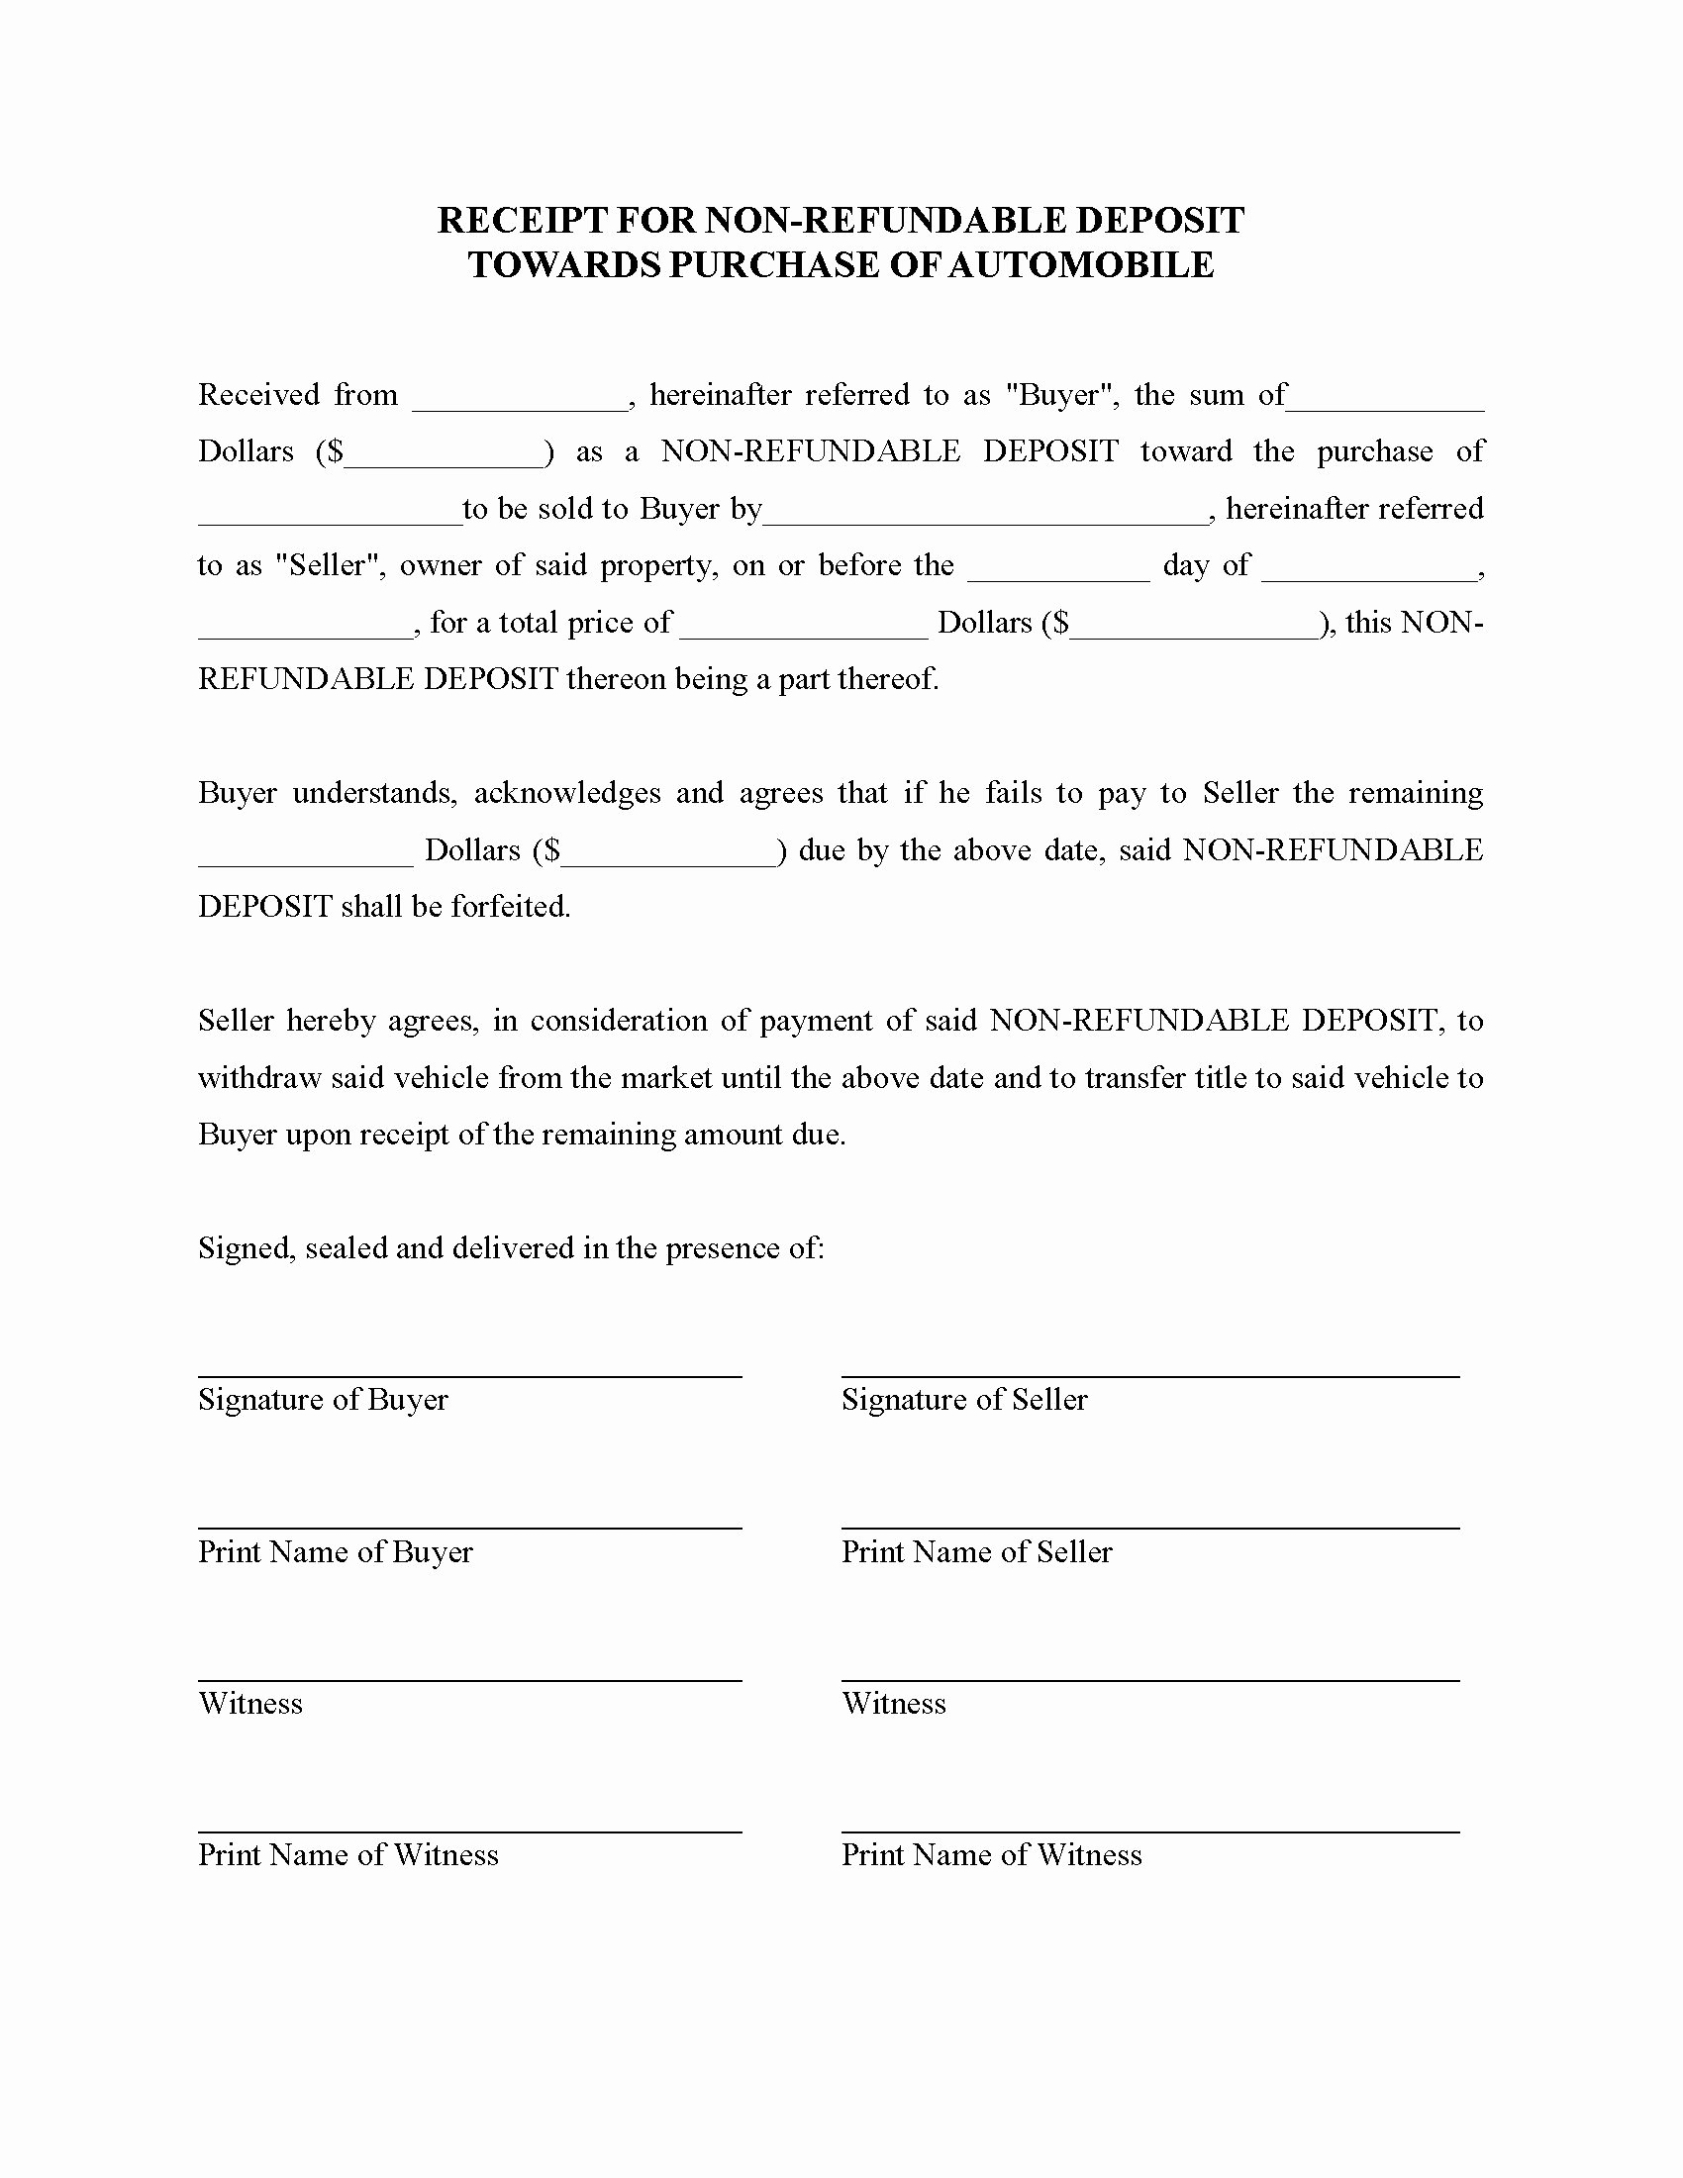 Non Refundable Deposit Form Template | Peterainsworth Throughout Non Refundable Deposit Agreement Template